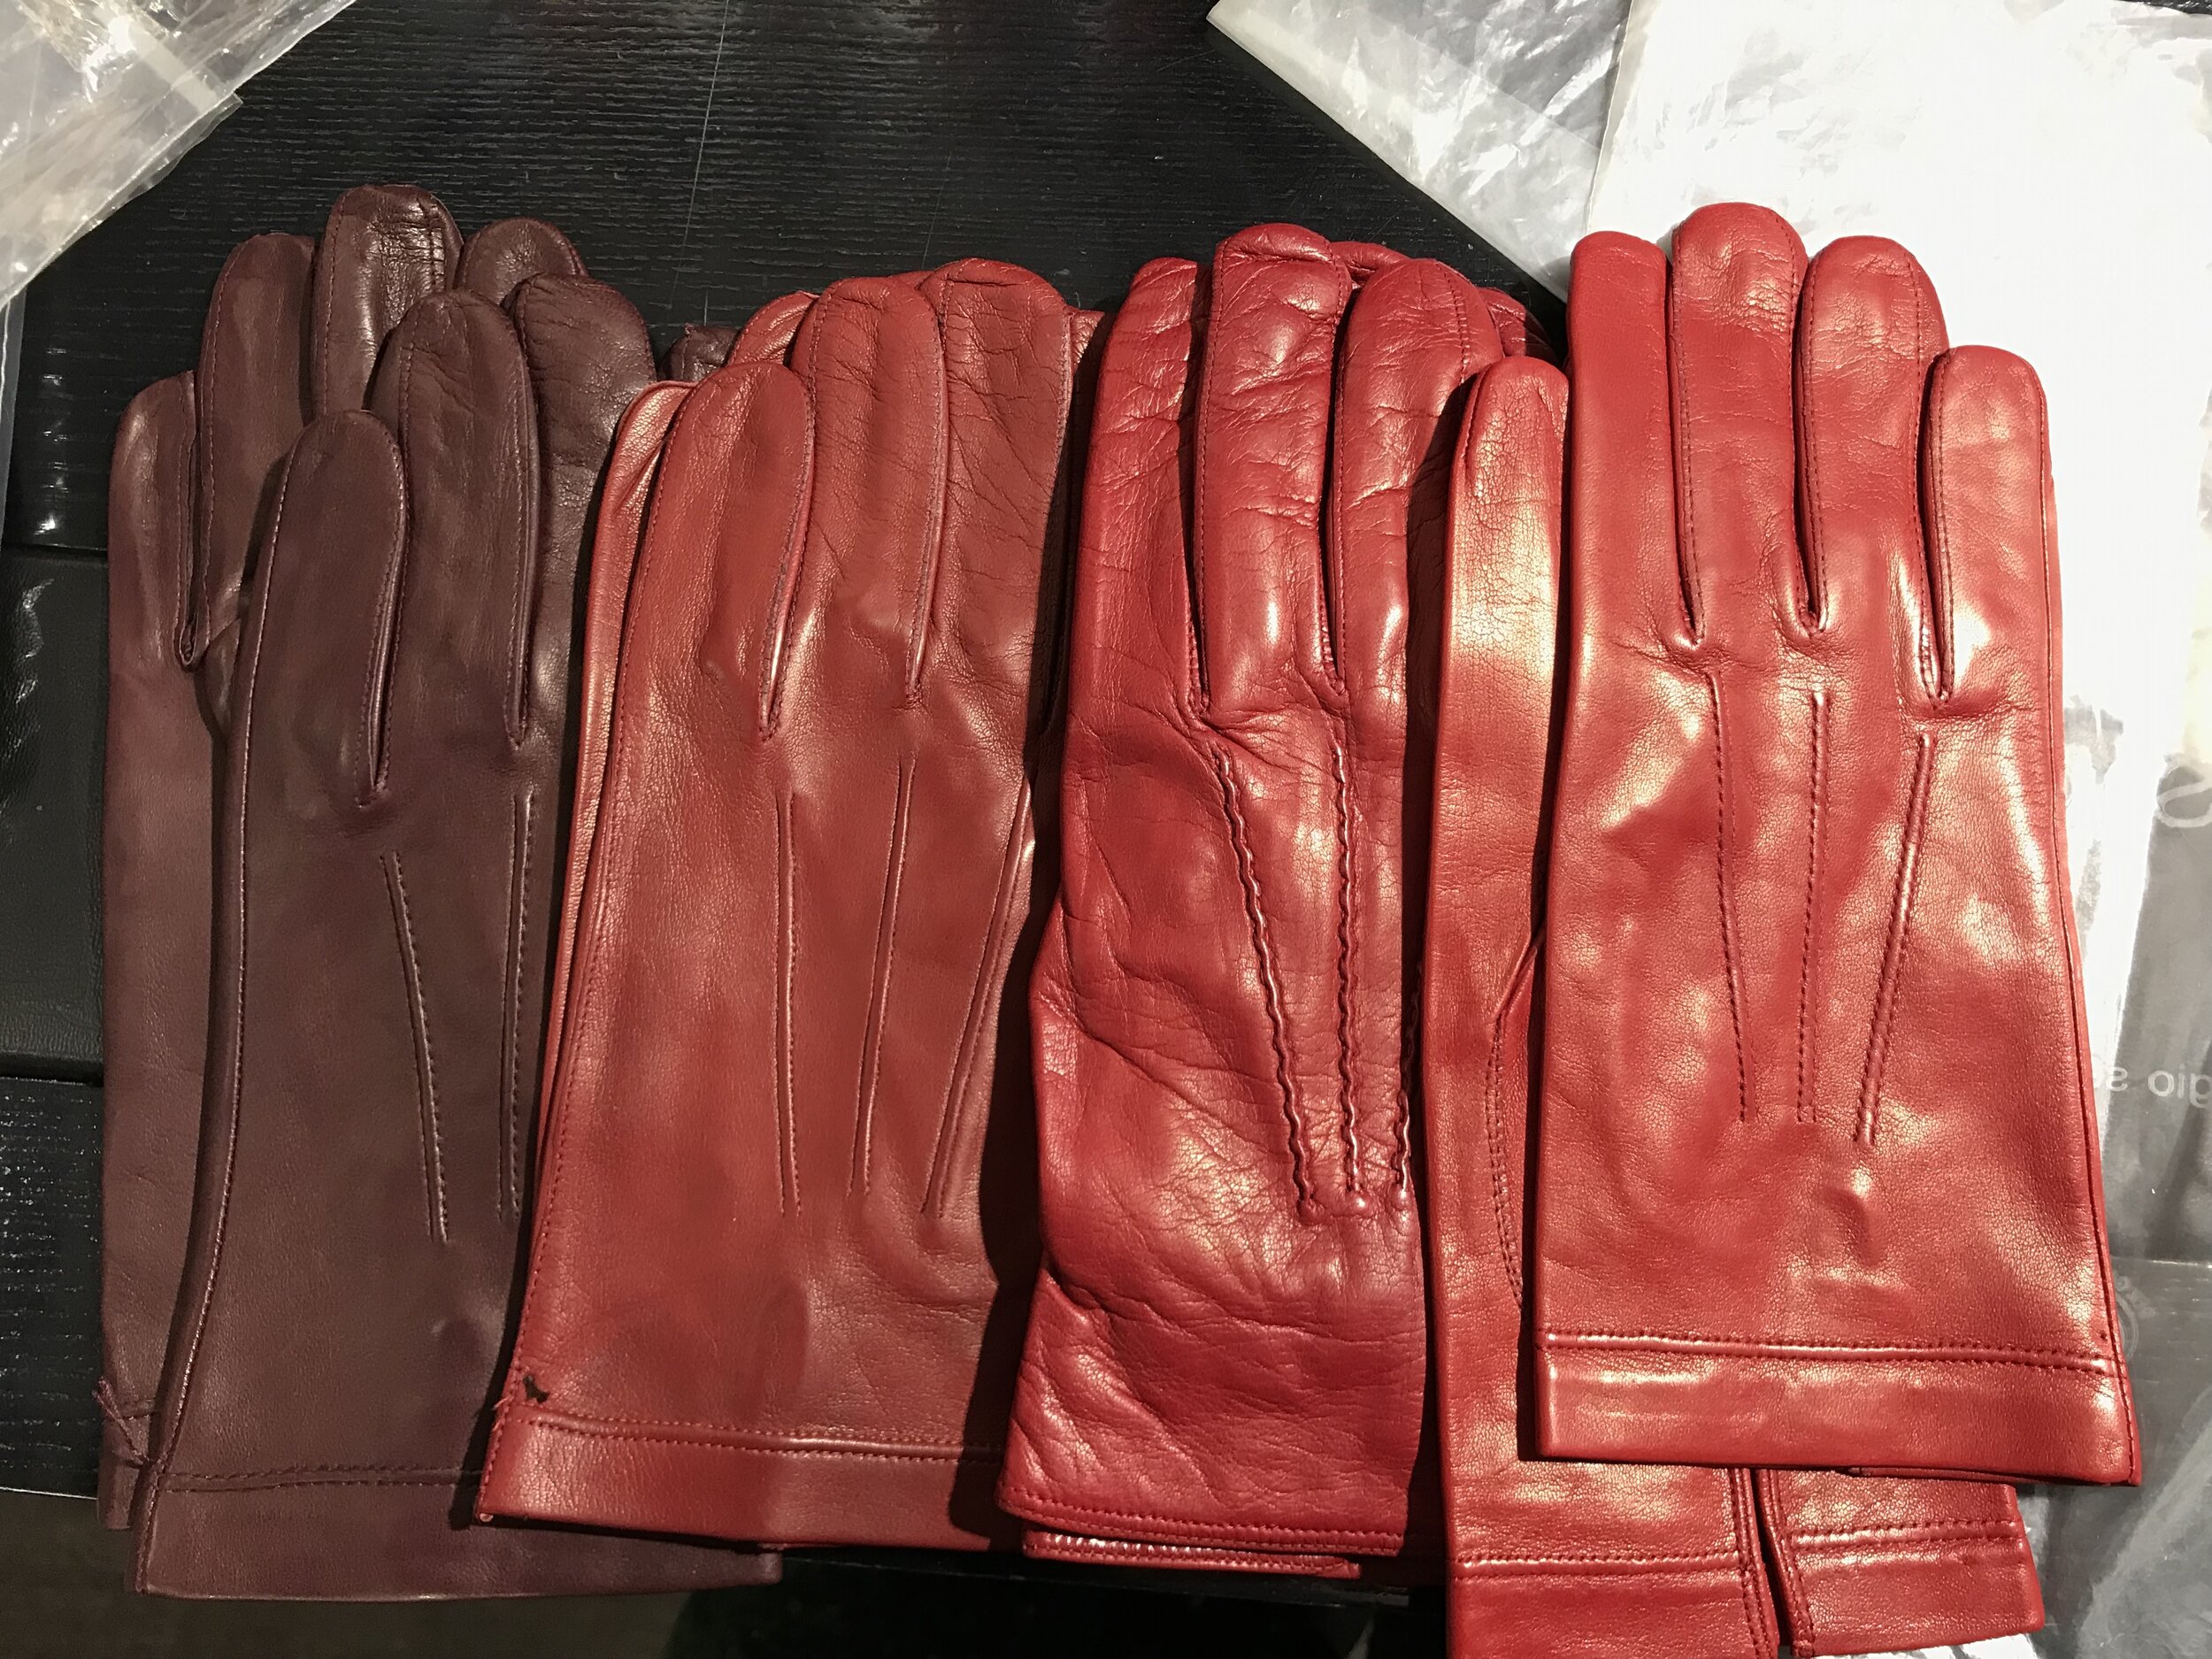 Red leather glove selection shopped for "Meyer"